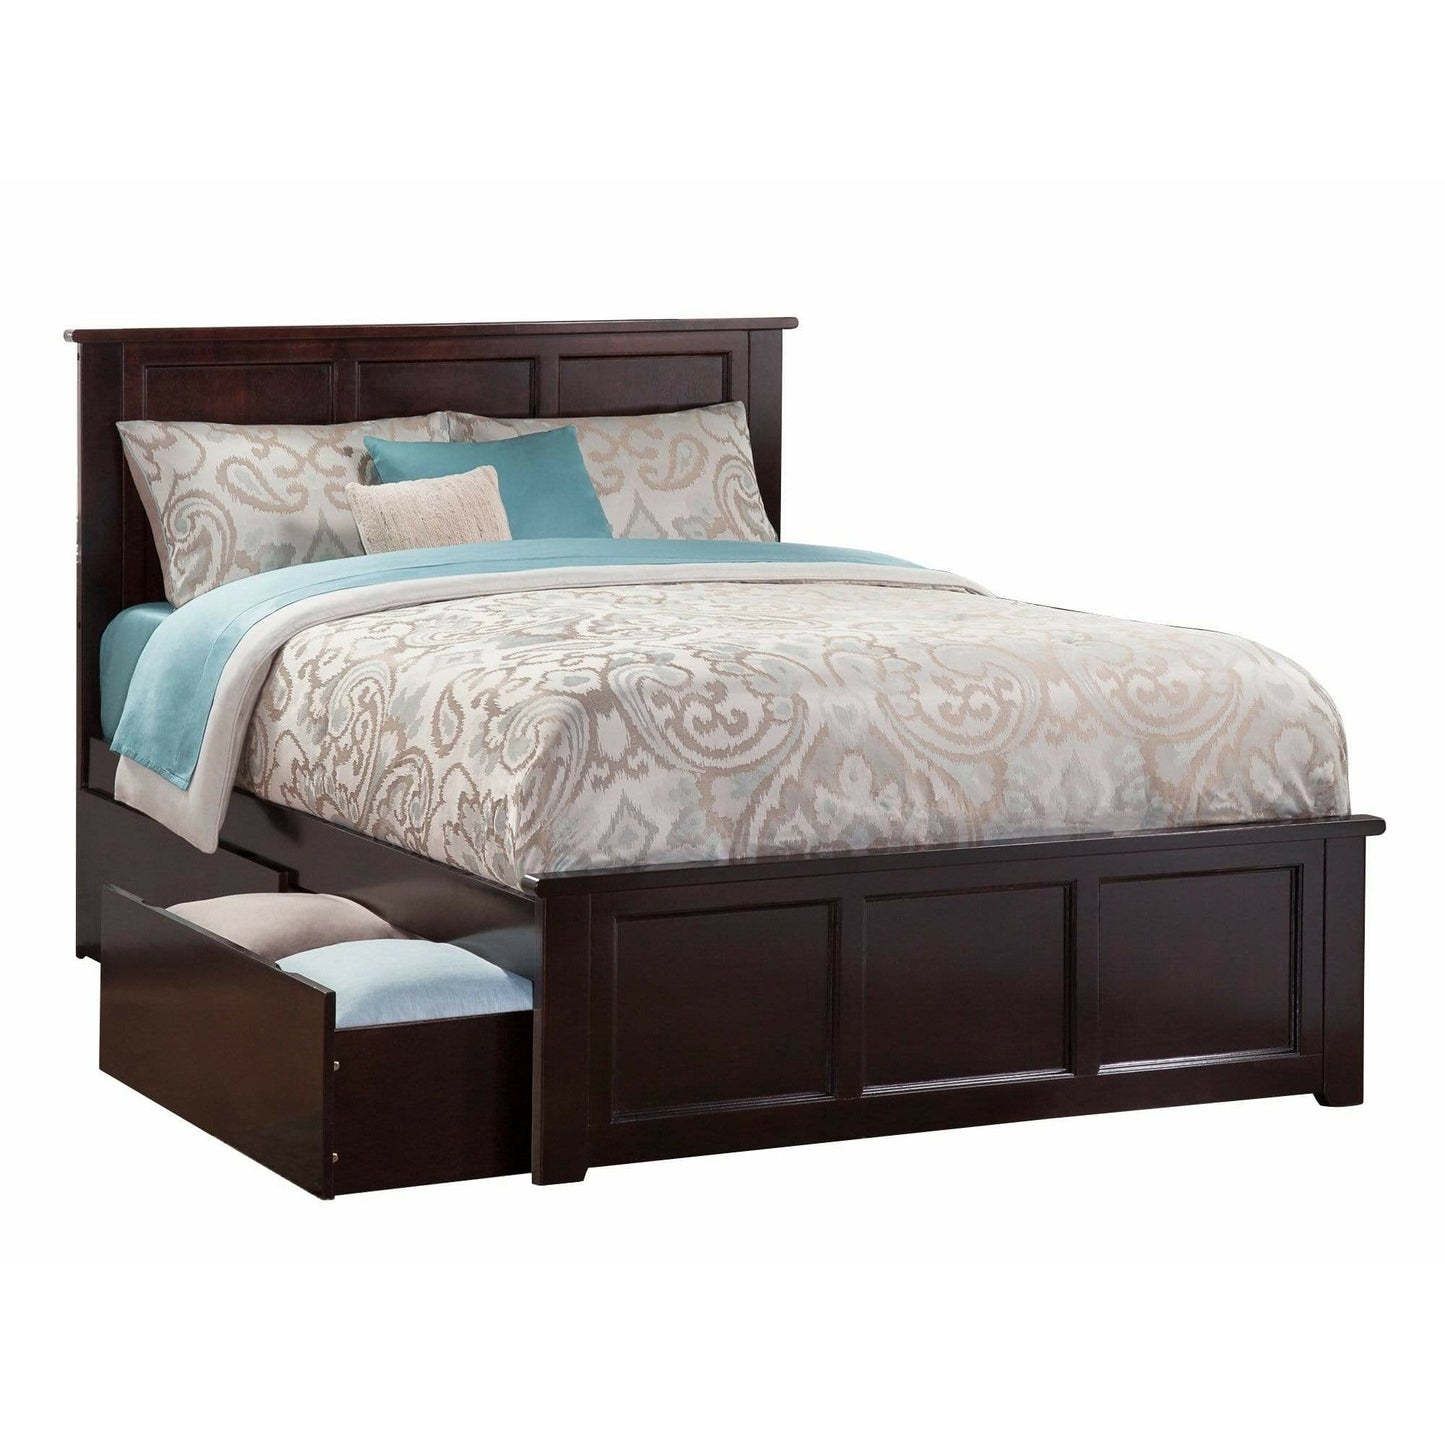 Atlantic Furniture Bed Madison Queen Platform Bed with Matching Foot Board with 2 Urban Bed Drawers in Espresso